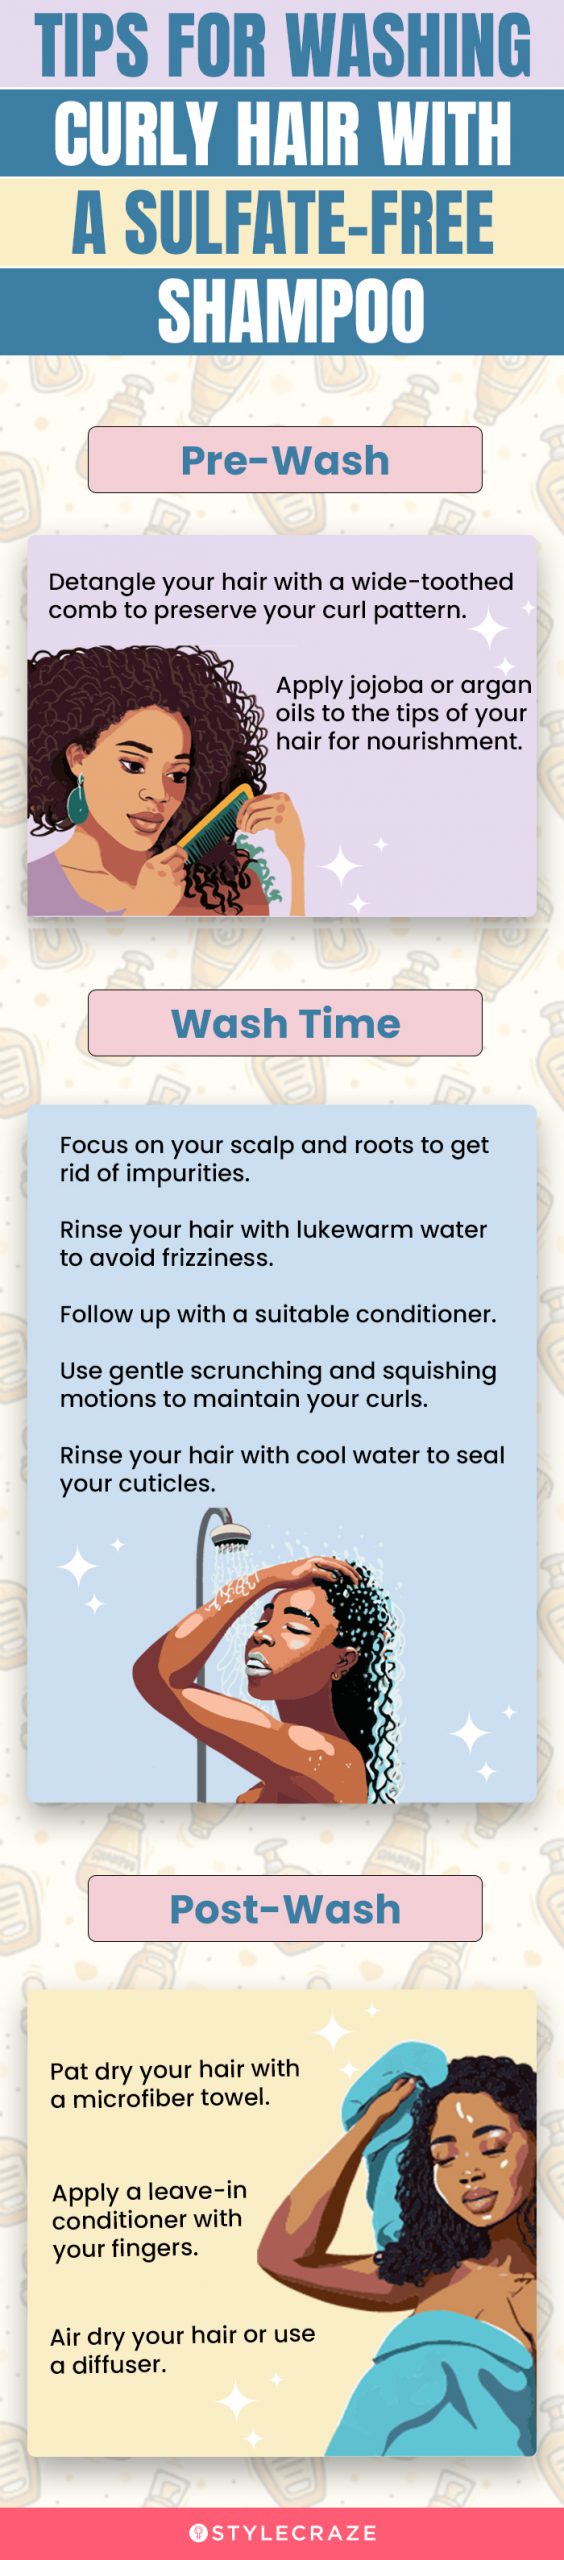 Tips For Washing Curly Hair With A Sulfate-Free Shampoo (infographic)